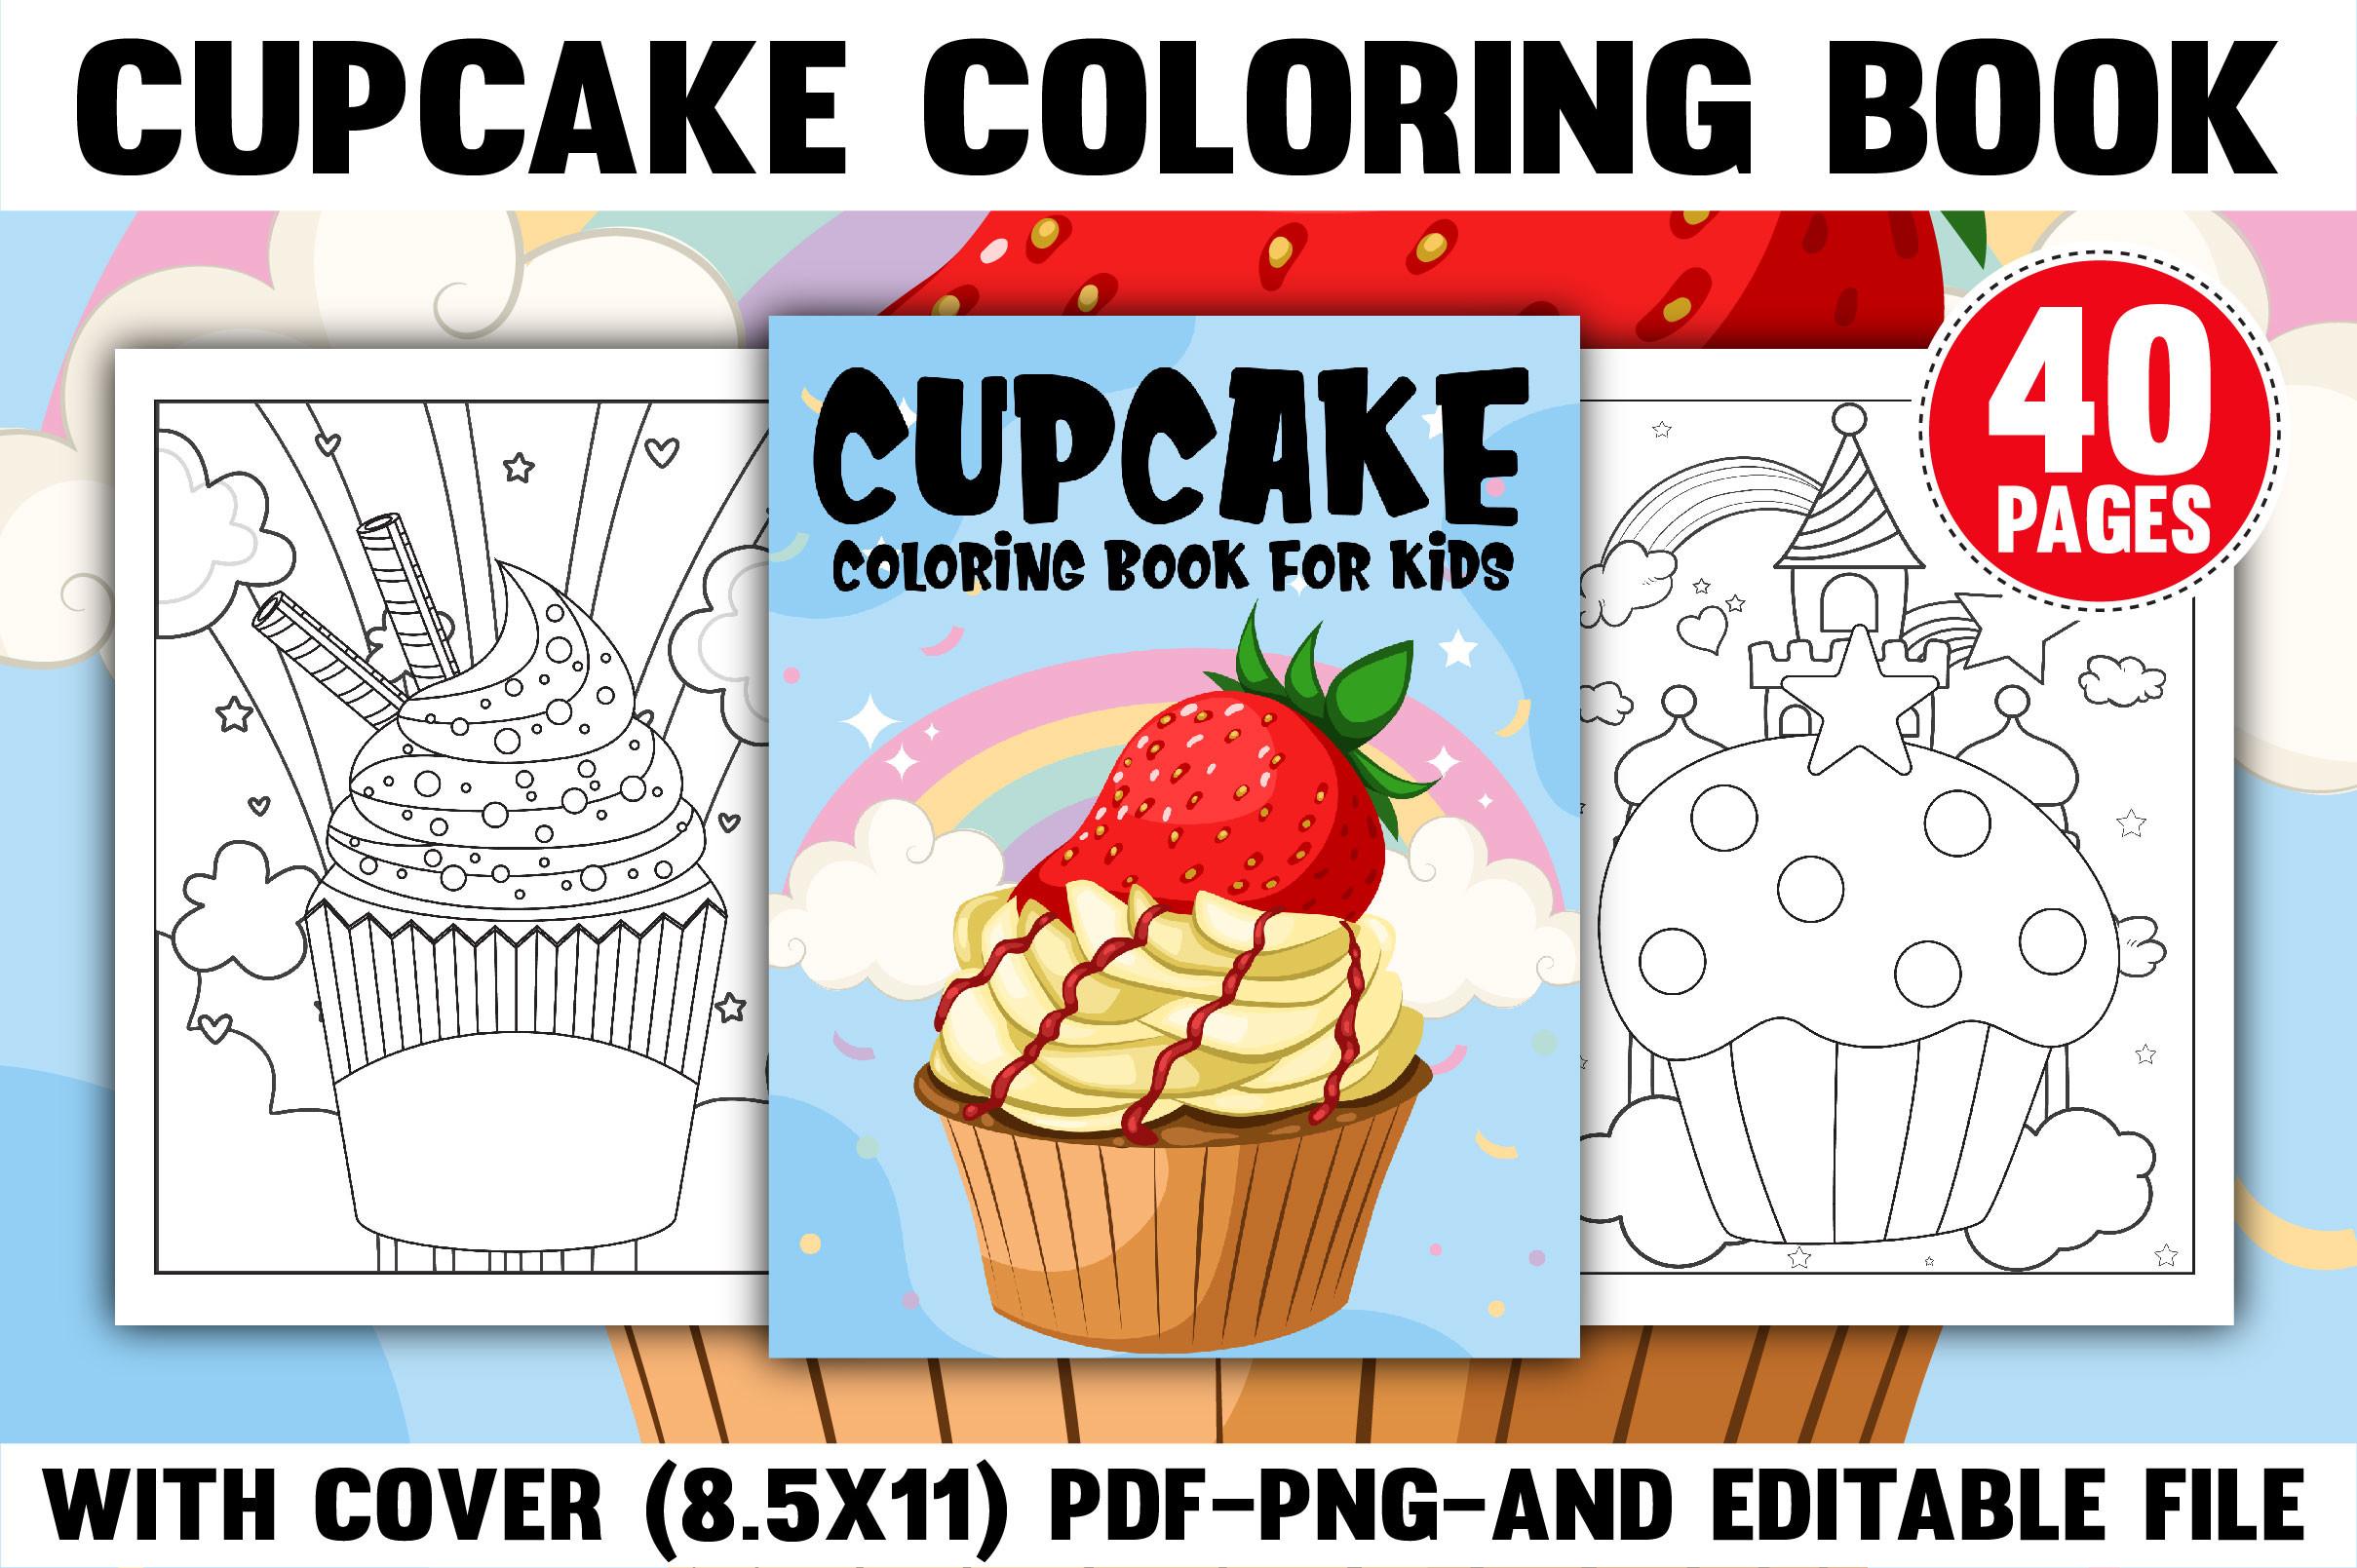 Cupcake Coloring Book with Cover Design